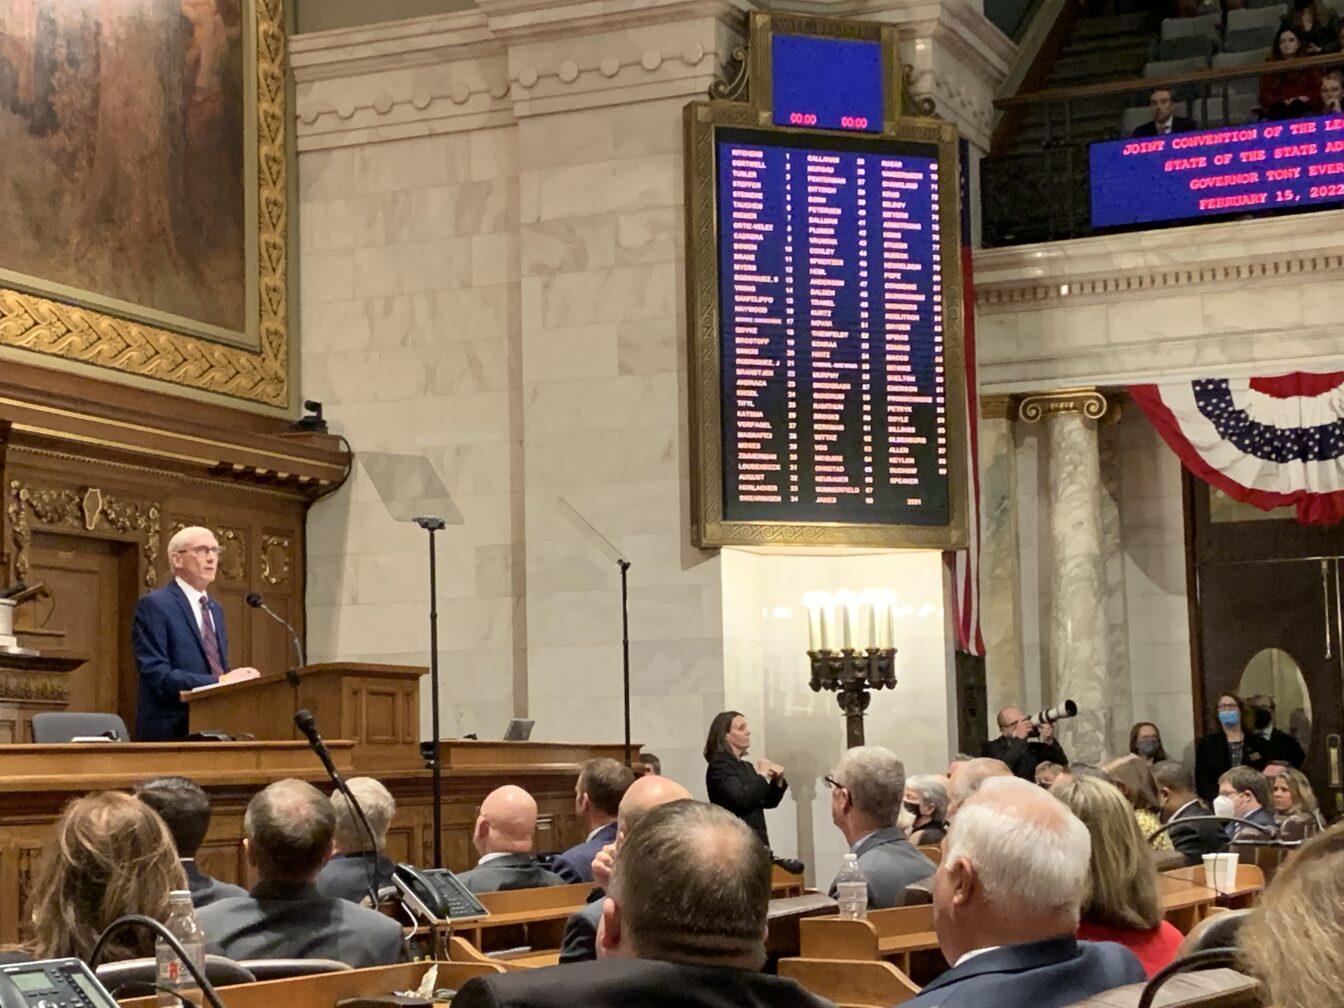 Wisconsin’s 46th Gov. Tony Evers gave his State of the State address to a joint convention of the Legislature Feb. 15, 2022 at the Wisconsin State Capitol